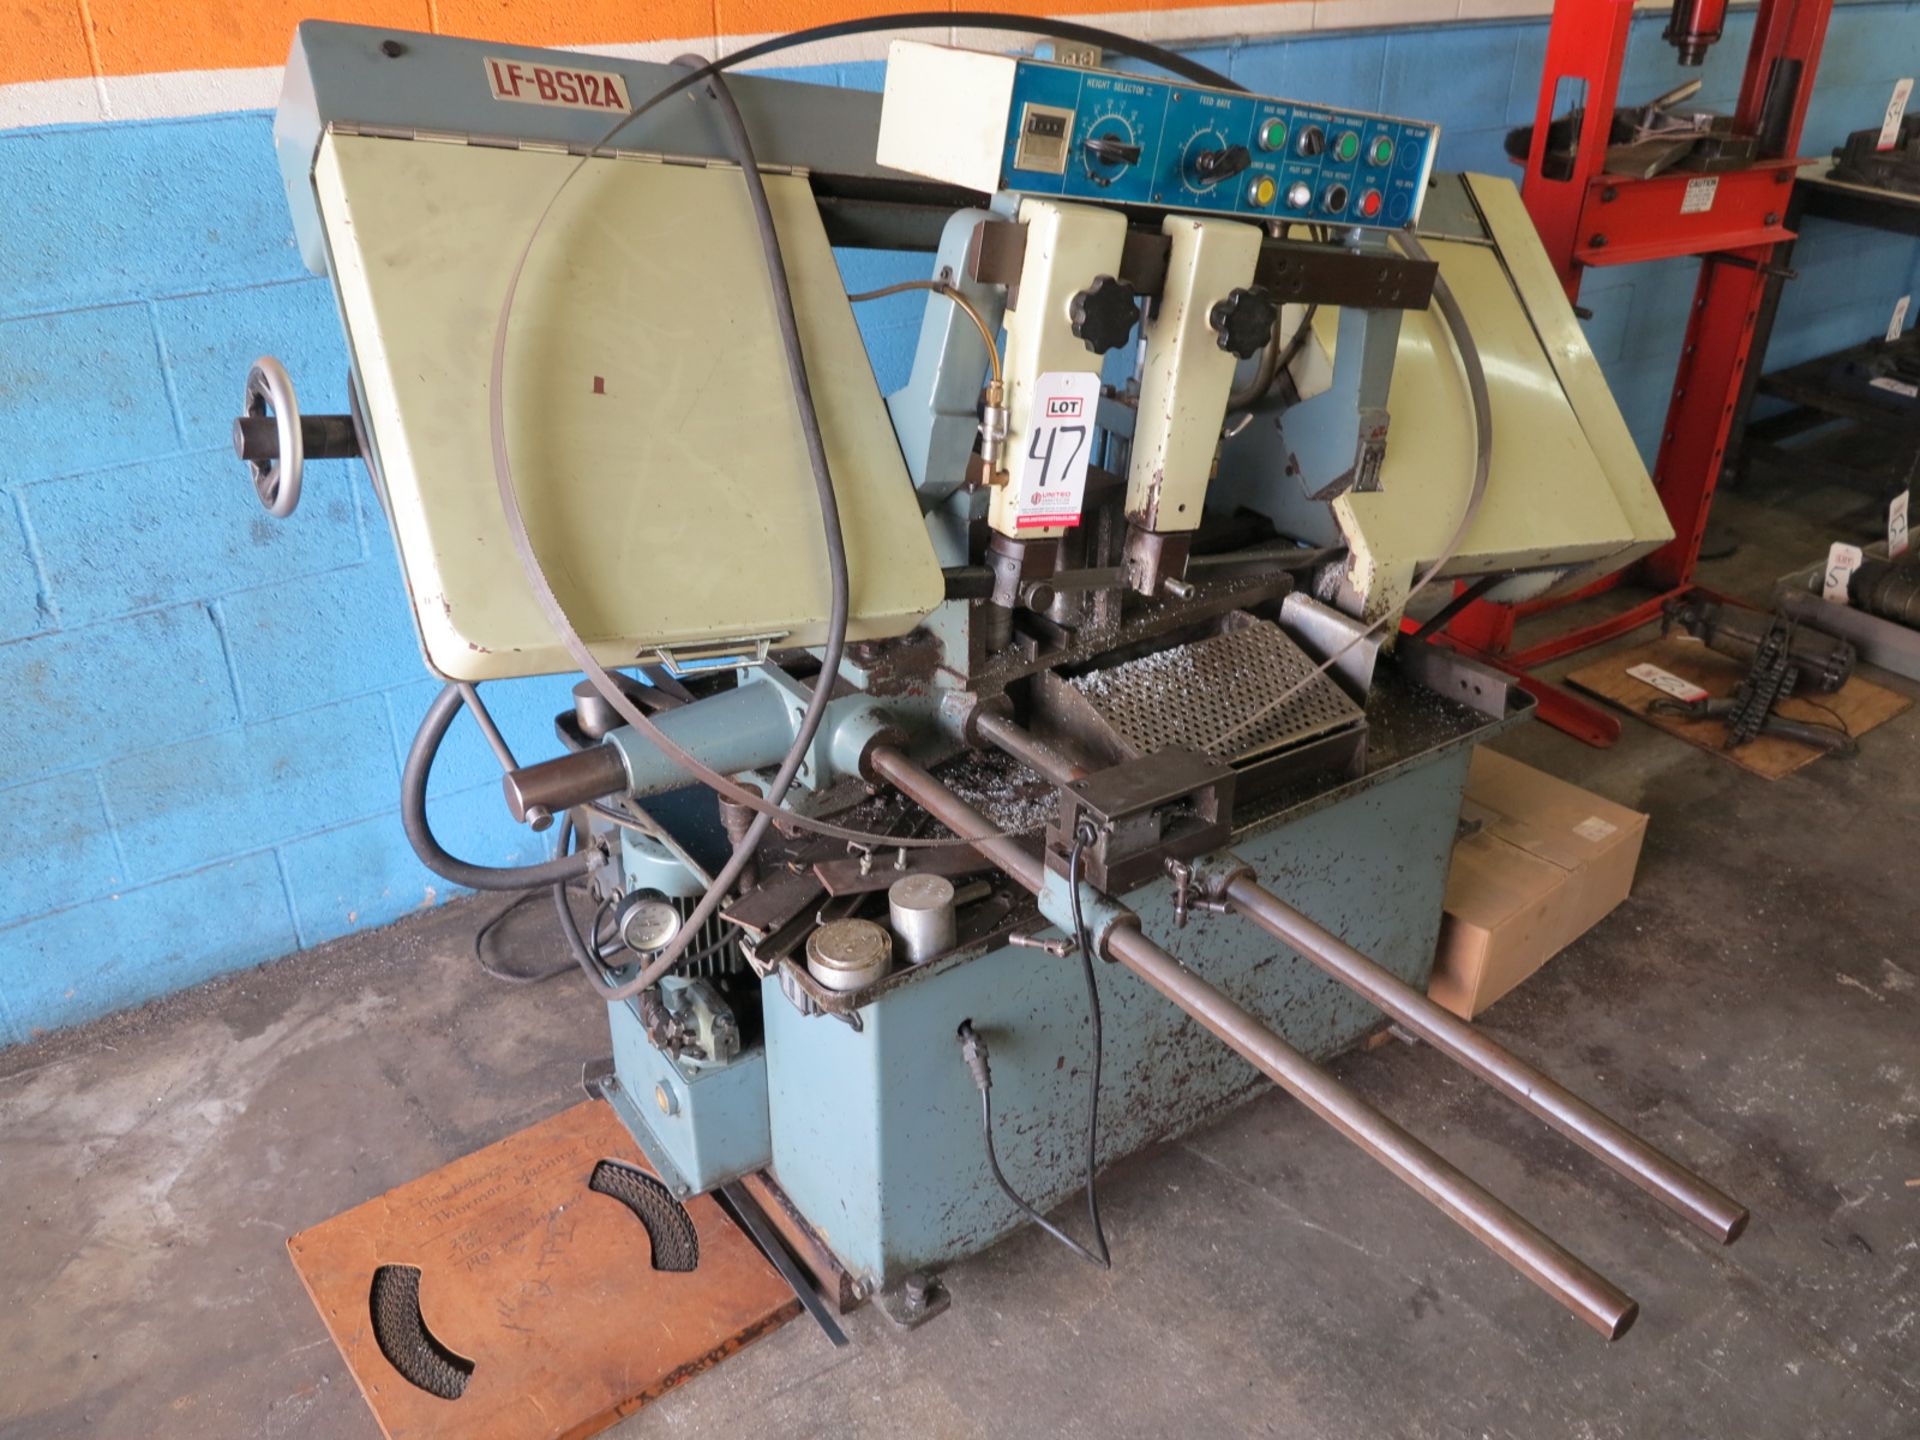 LOT - LIAN FENG HORIZONTAL BAND SAW, MODEL LF-BS12A, 12" CAPACITY, S/N 12459, W/ 5' ROLLER CONVEYOR, - Image 2 of 4